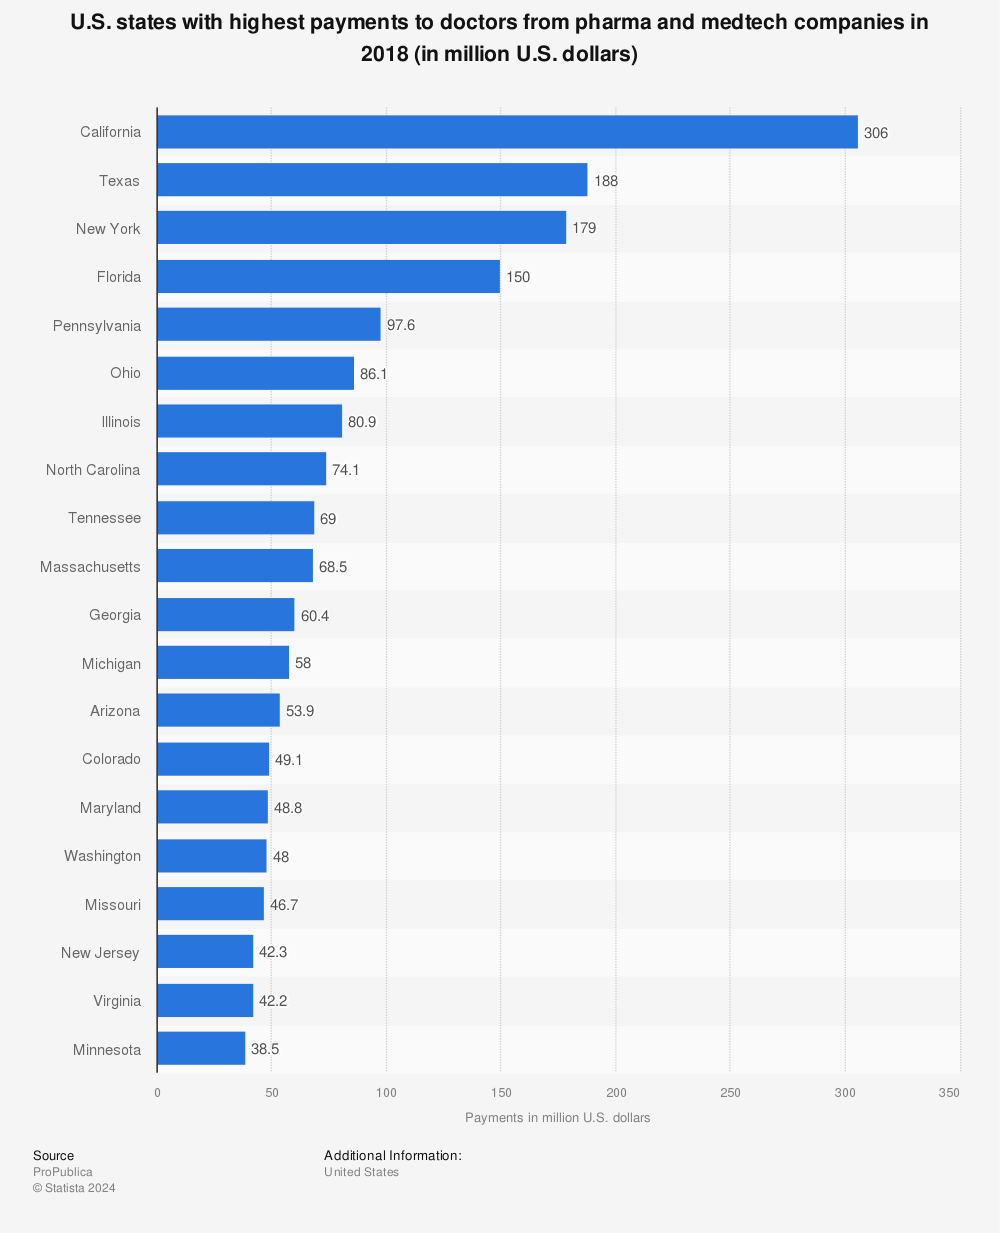 Statistic: U.S. states with highest payments to doctors from pharma and medtech companies in 2018 (in million U.S. dollars) | Statista